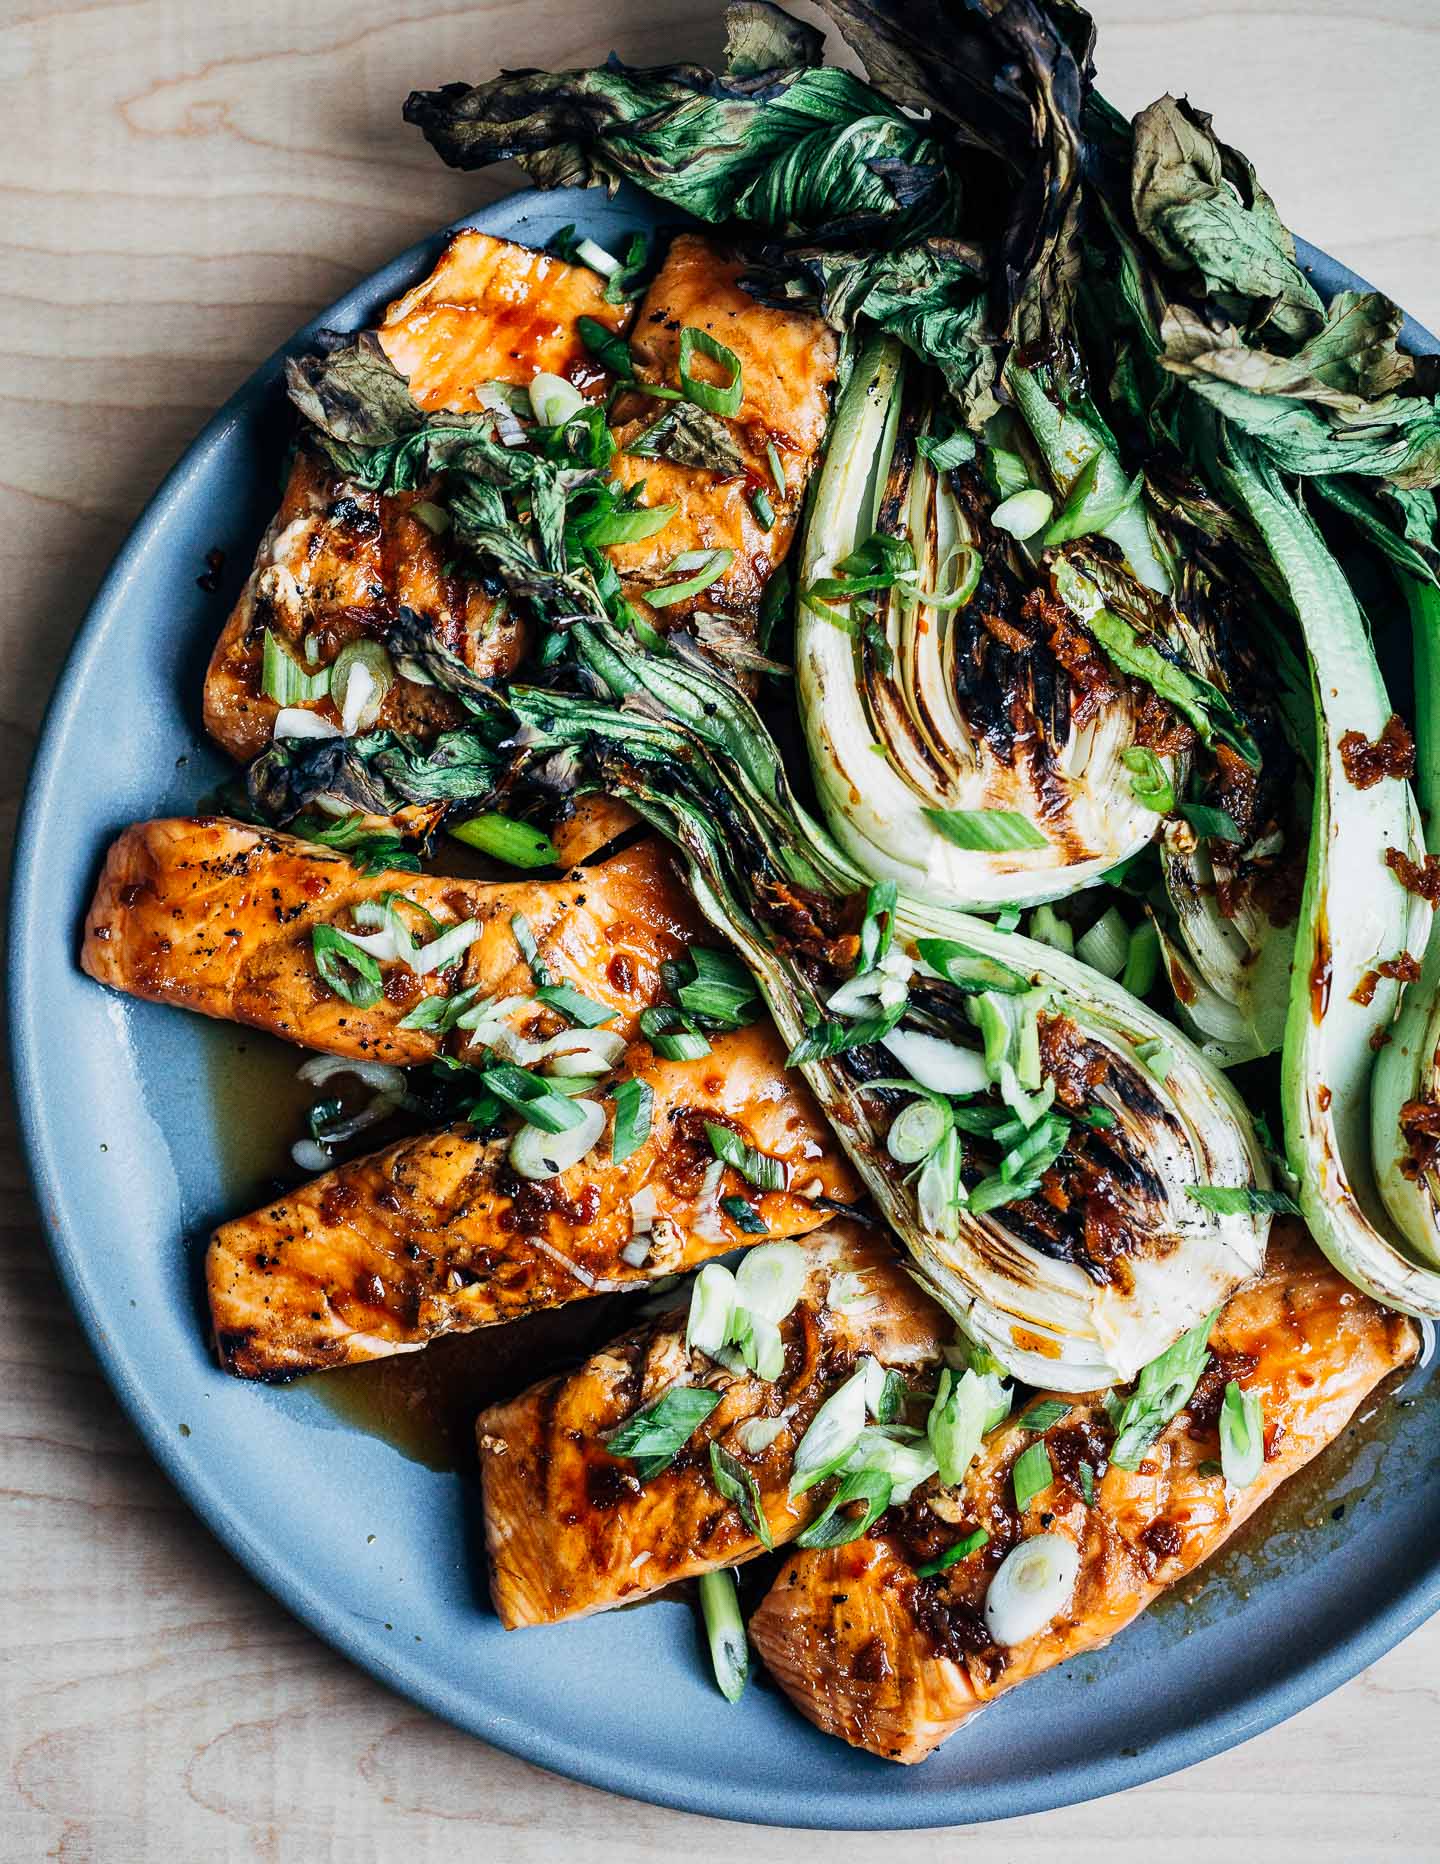 Simple, completely delicious summer cookout inspiration: teriyaki grilled salmon and bok choy.